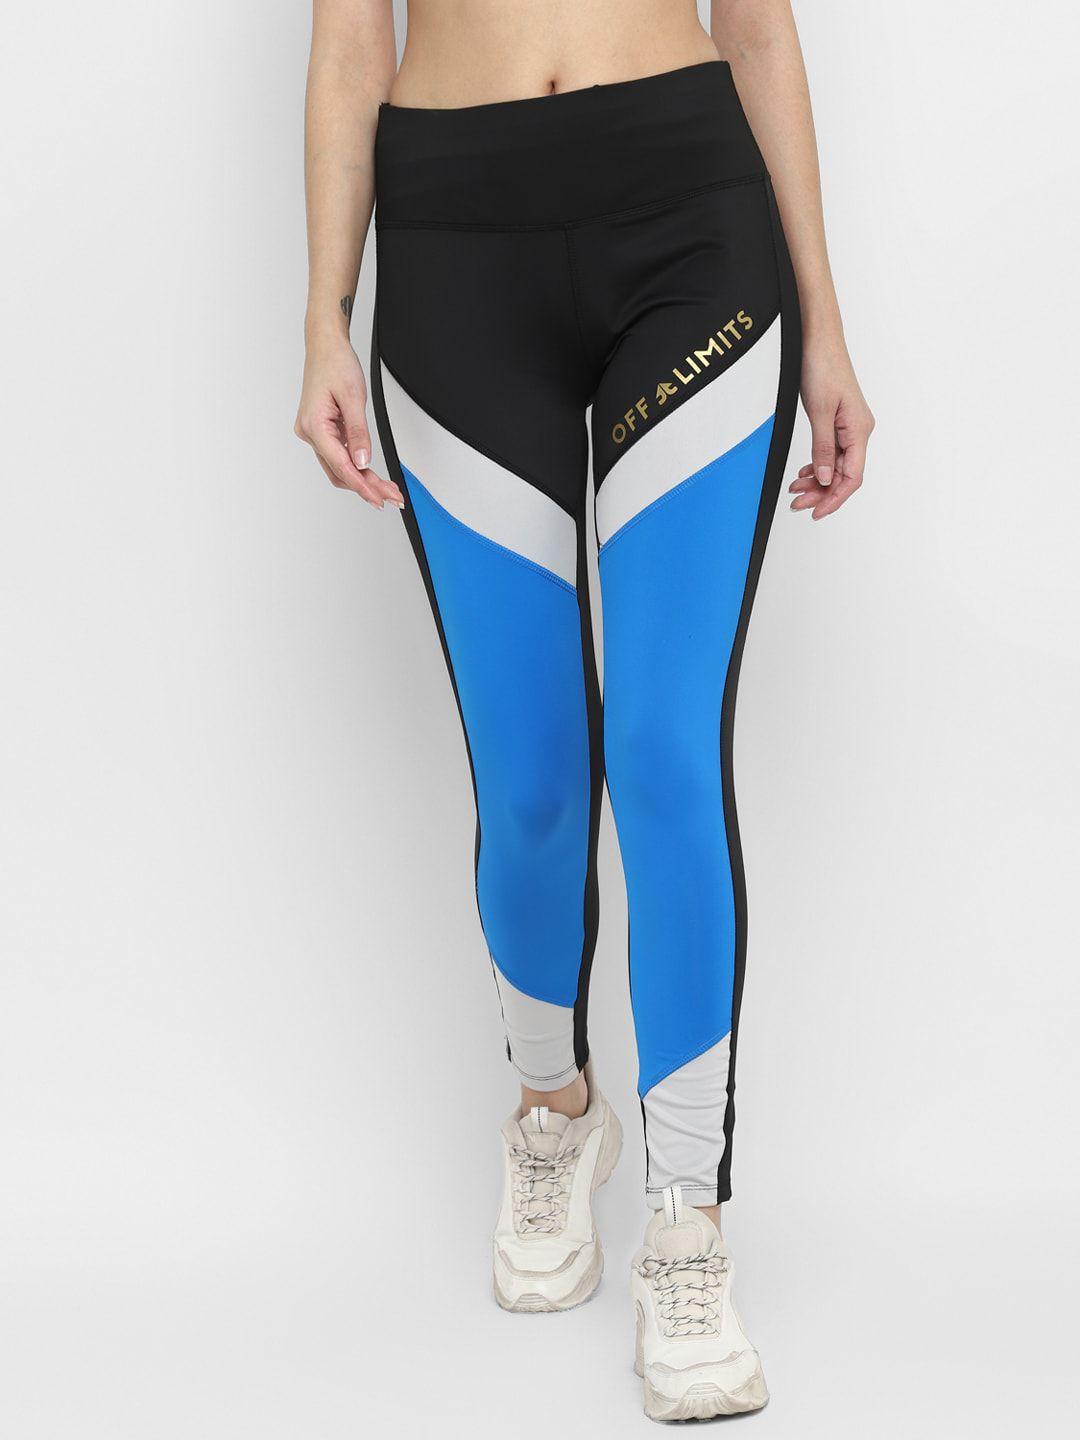 off limits women black & blue colourblocked workout tights